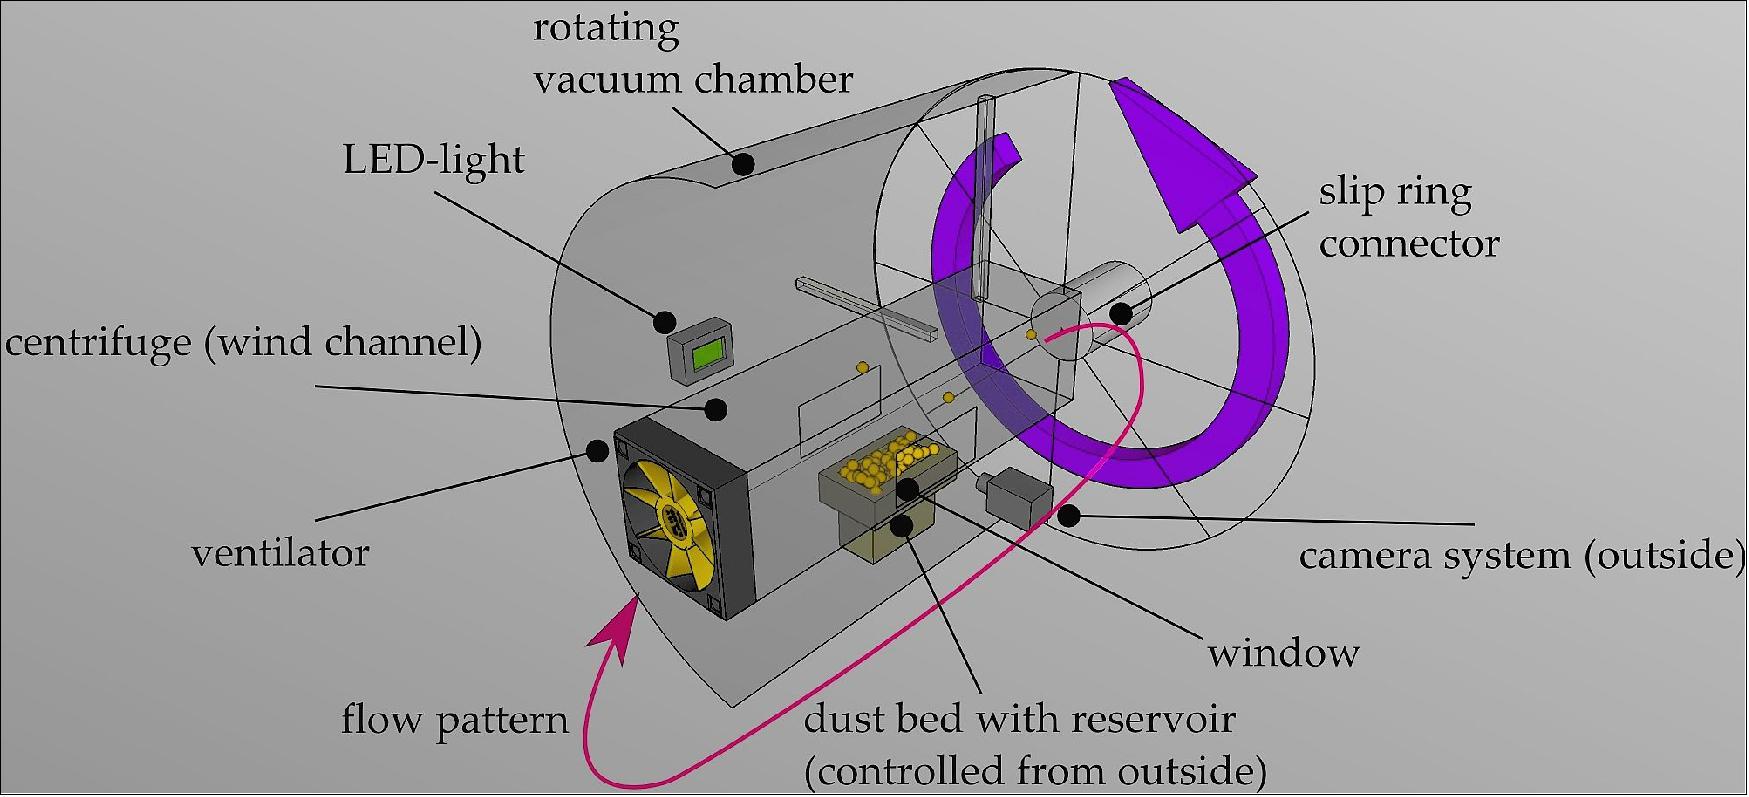 Figure 37: Schematic view of the WIND MILL experiment assembly in the aircraft (image credit: University of Duisburg-Essen)